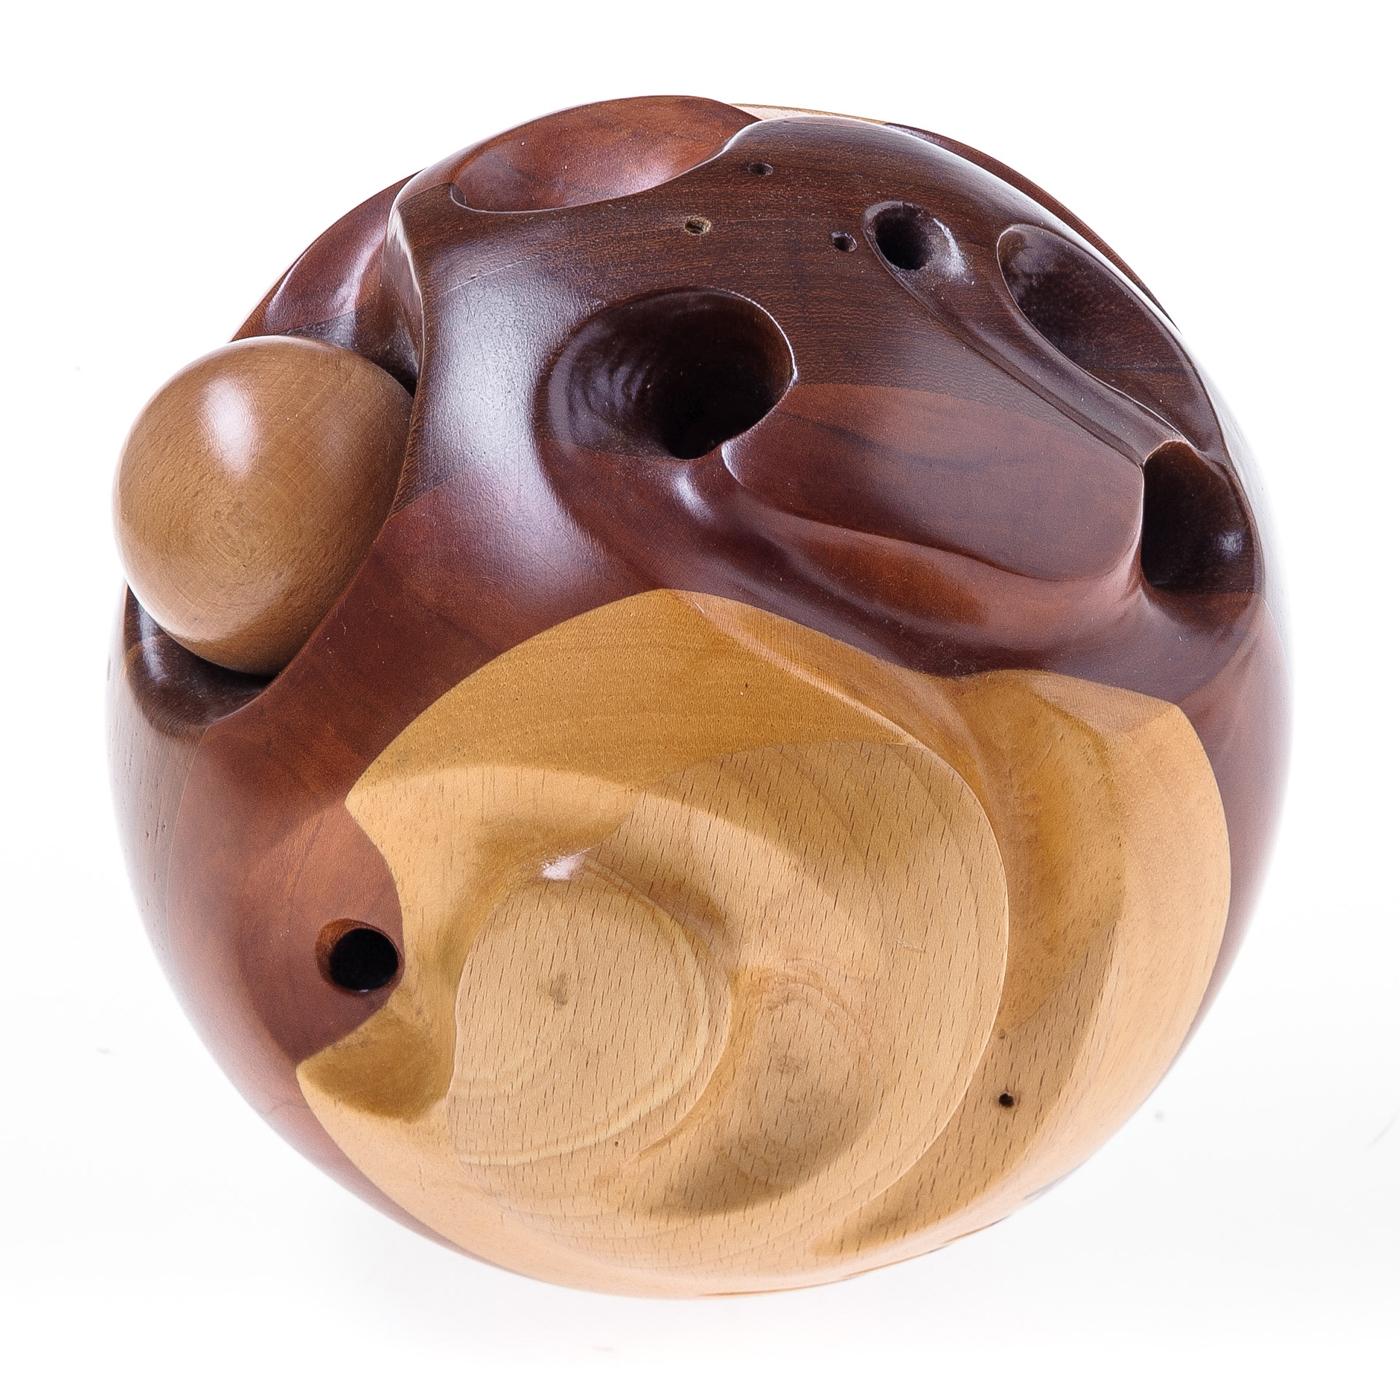 Merging sculpture and design, this handmade piece is a testament to masterful craftsmanship that celebrates the effortless elegance of wood. Entirely handcrafted, this sphere is composed of layers of prized woods, whose contrasting light and dark